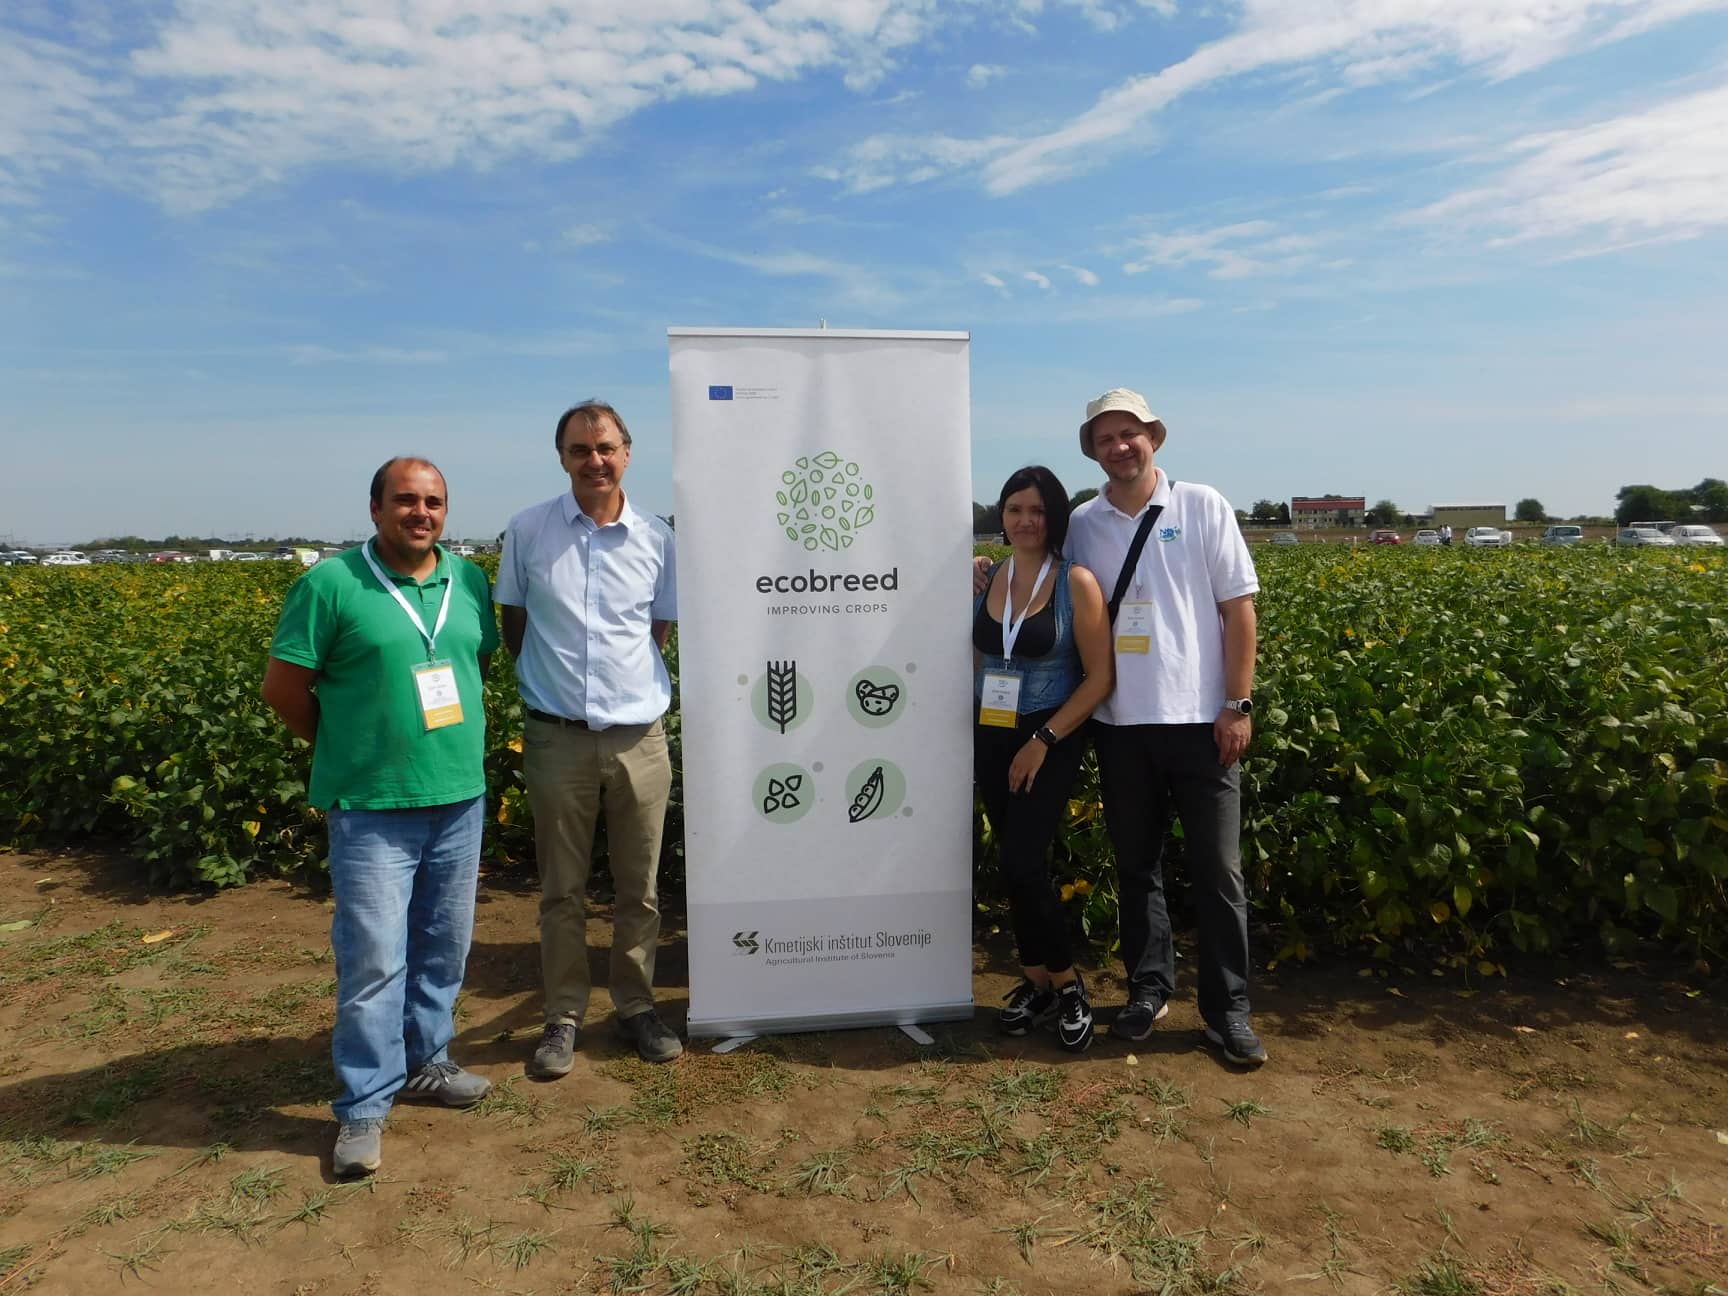 ECOBREED at the Autumn Field Days in Serbia